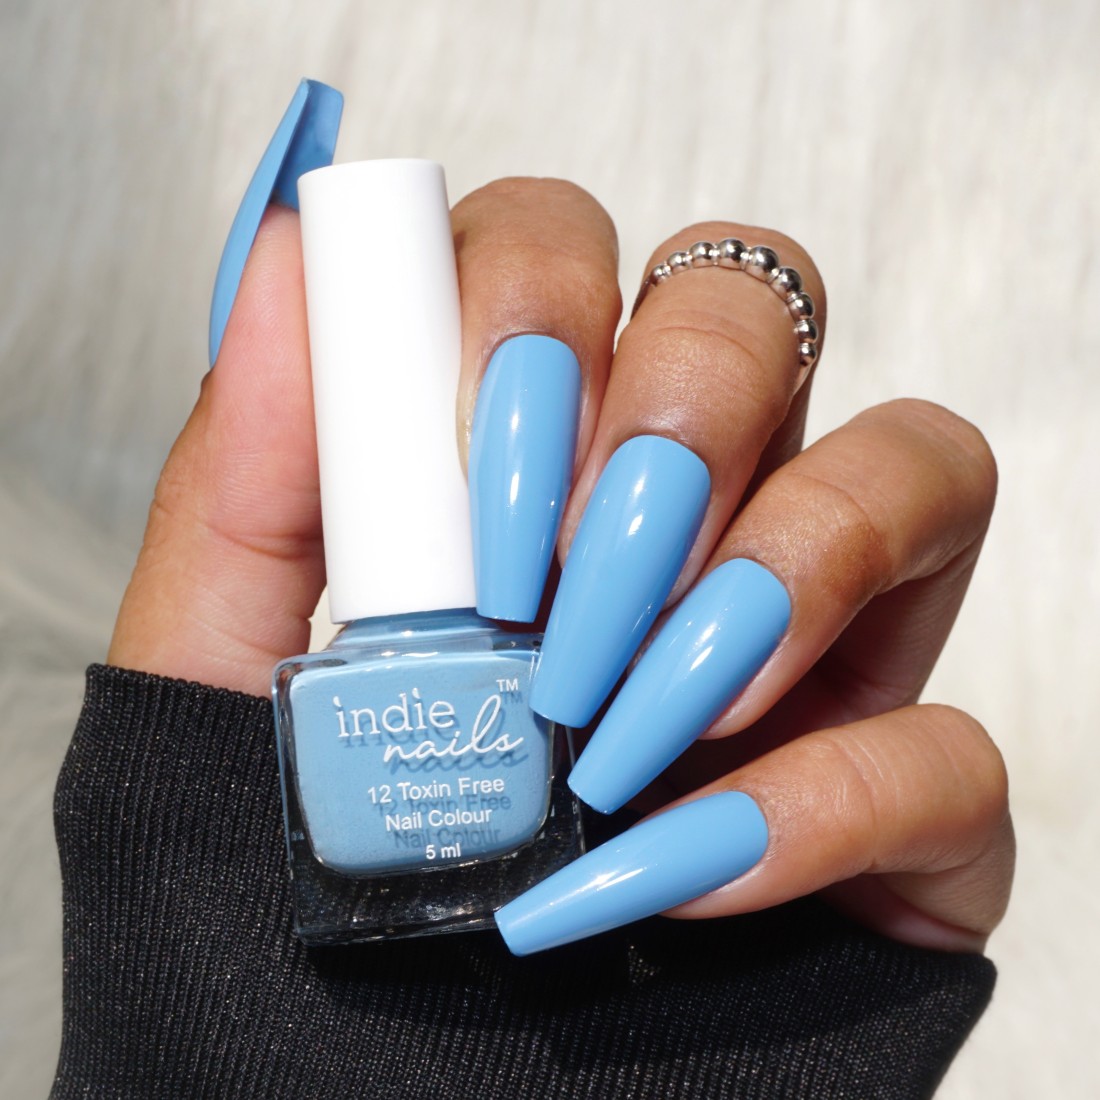 Buy duri Nail Polish, 107S, Cloud True Blue, Pastel Blue shade, Semi Matte  Finish.5 fl.oz. Online at Low Prices in India - Amazon.in